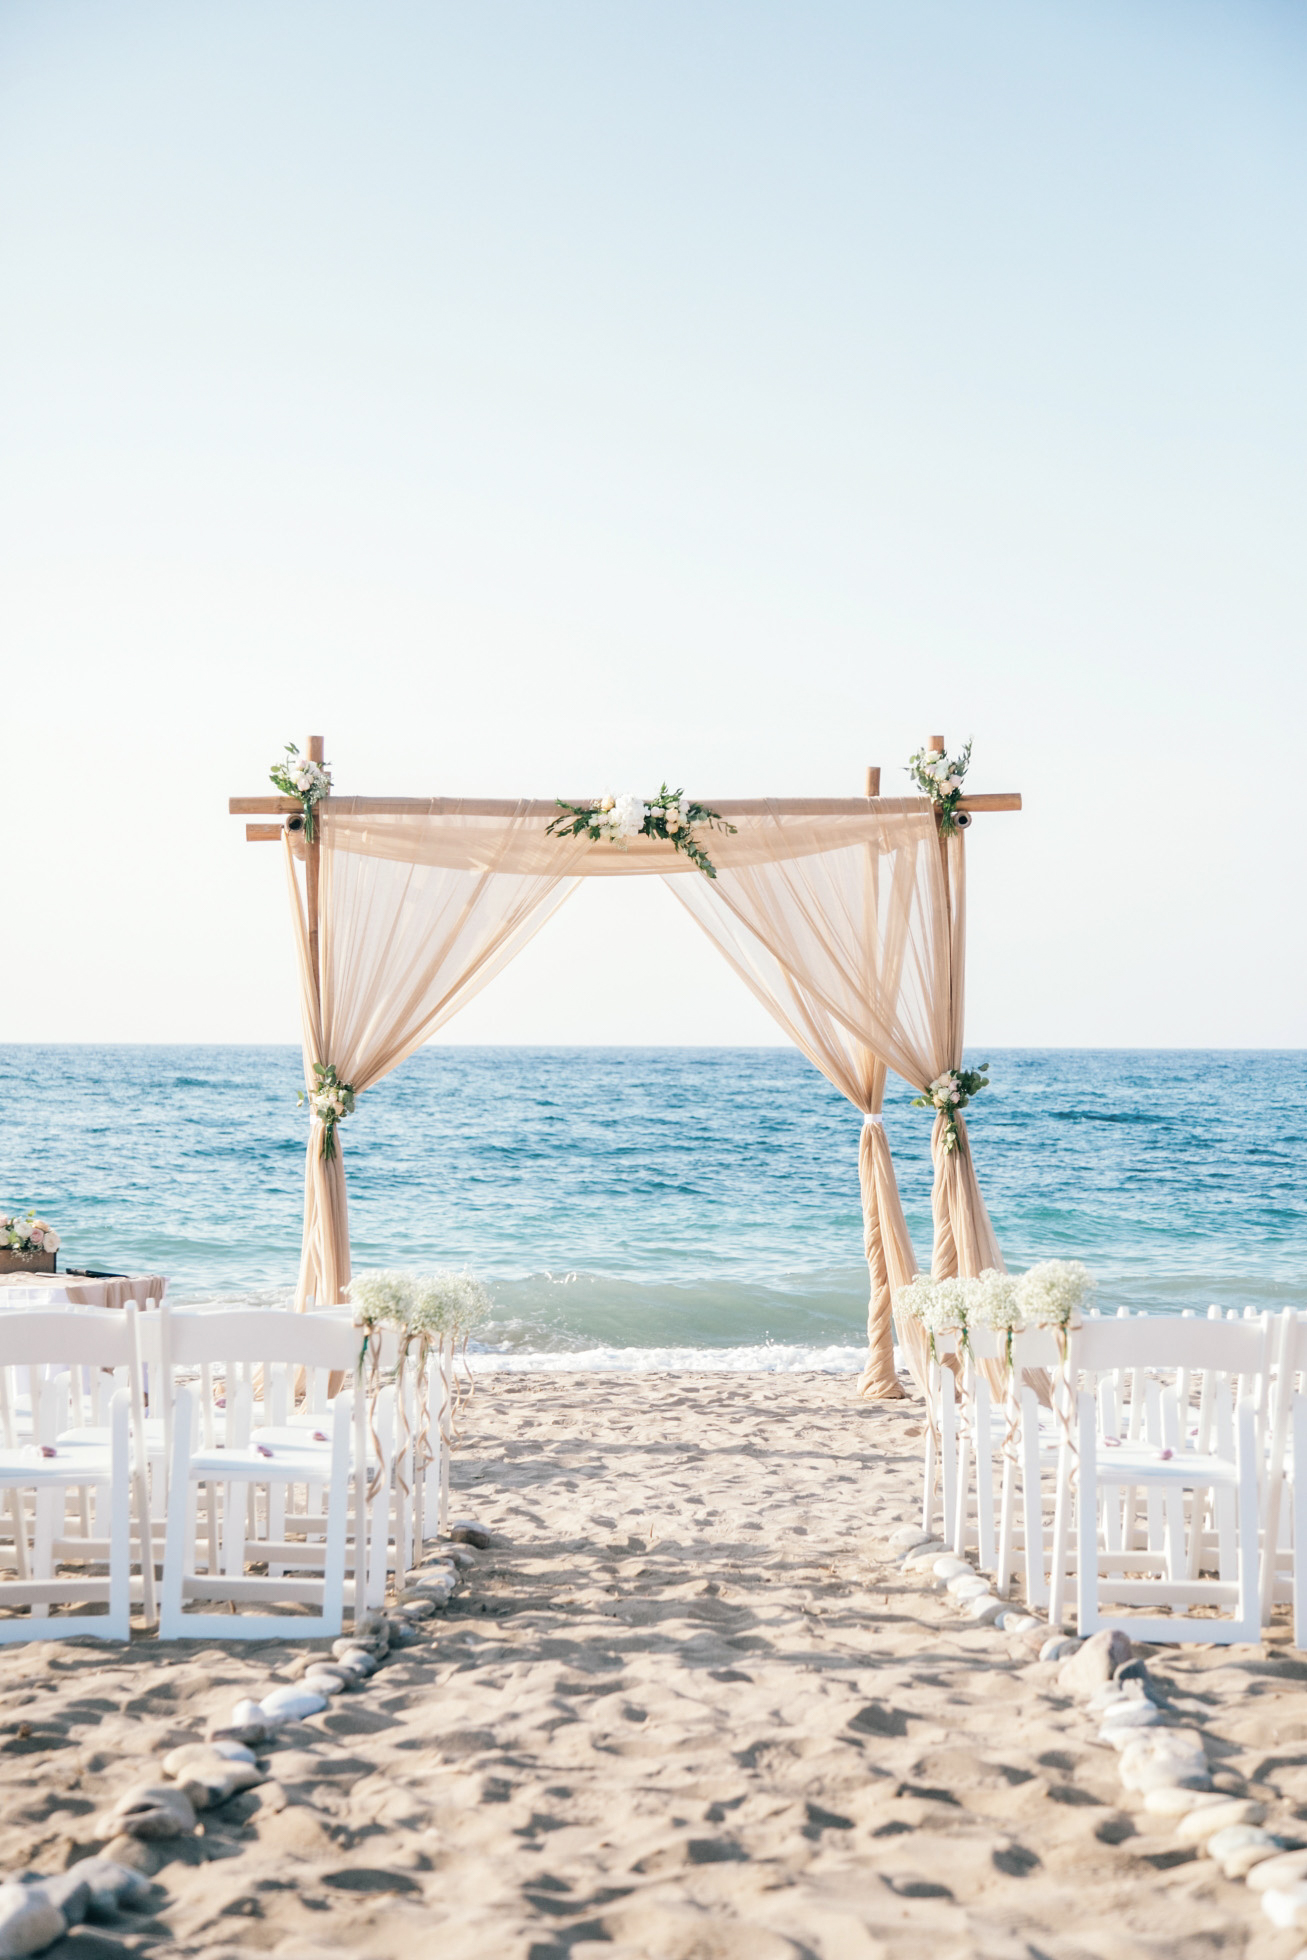 Beach ceremony set up in natural tones and fabrics for a symbolic ceremony planned and coordinated by a local wedding planner and photographed professionally.